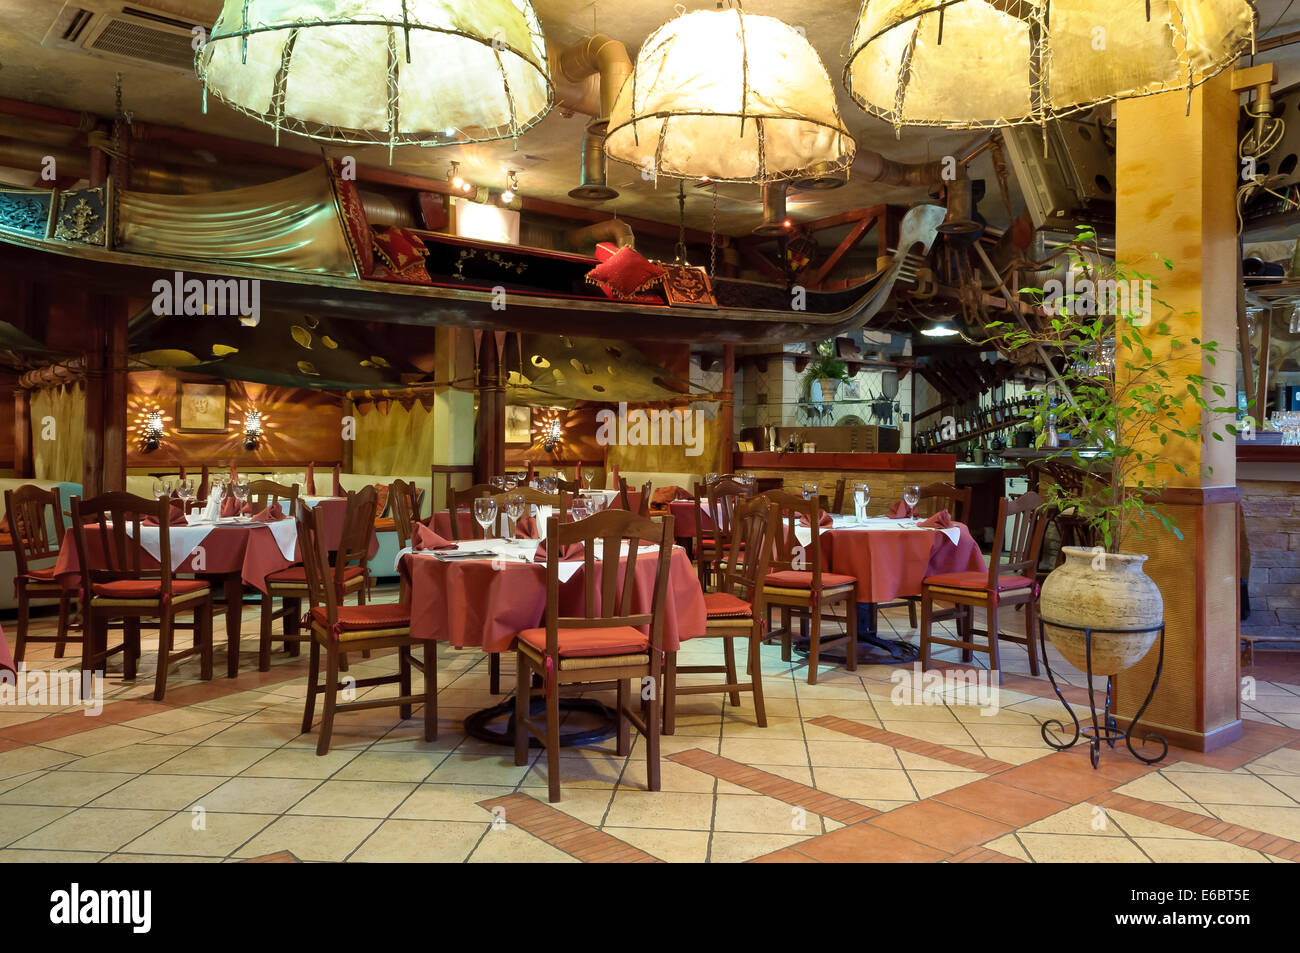 Italian restaurant with a traditional interior Stock Photo